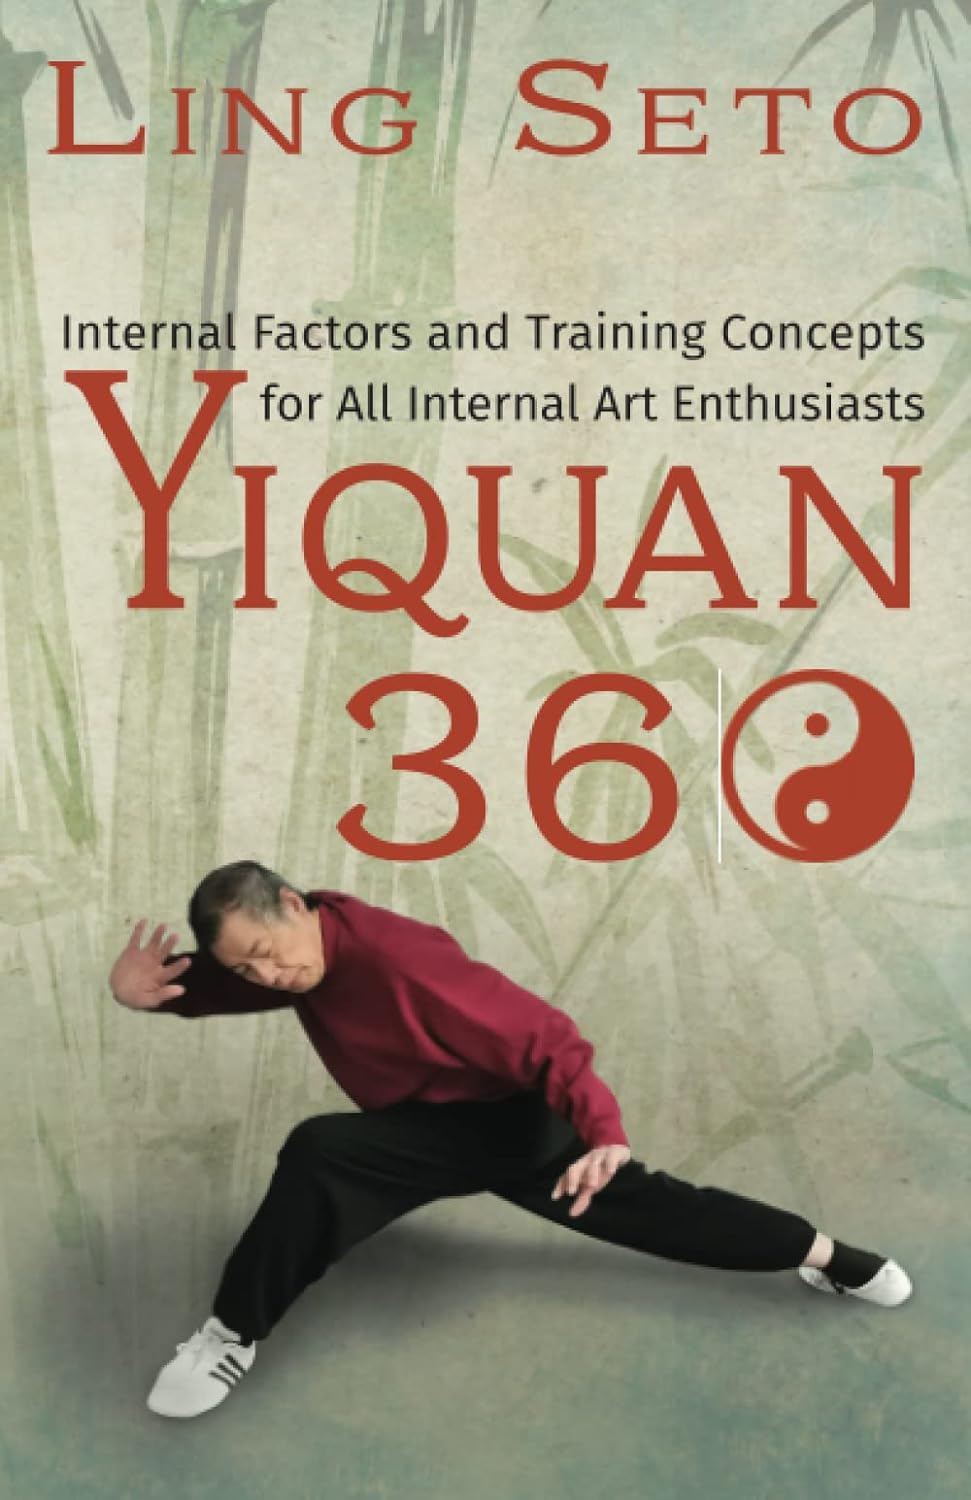 Yiquan 360: Internal Factors and Training Concepts for All Internal Art Enthusiasts Book by Ling Seto